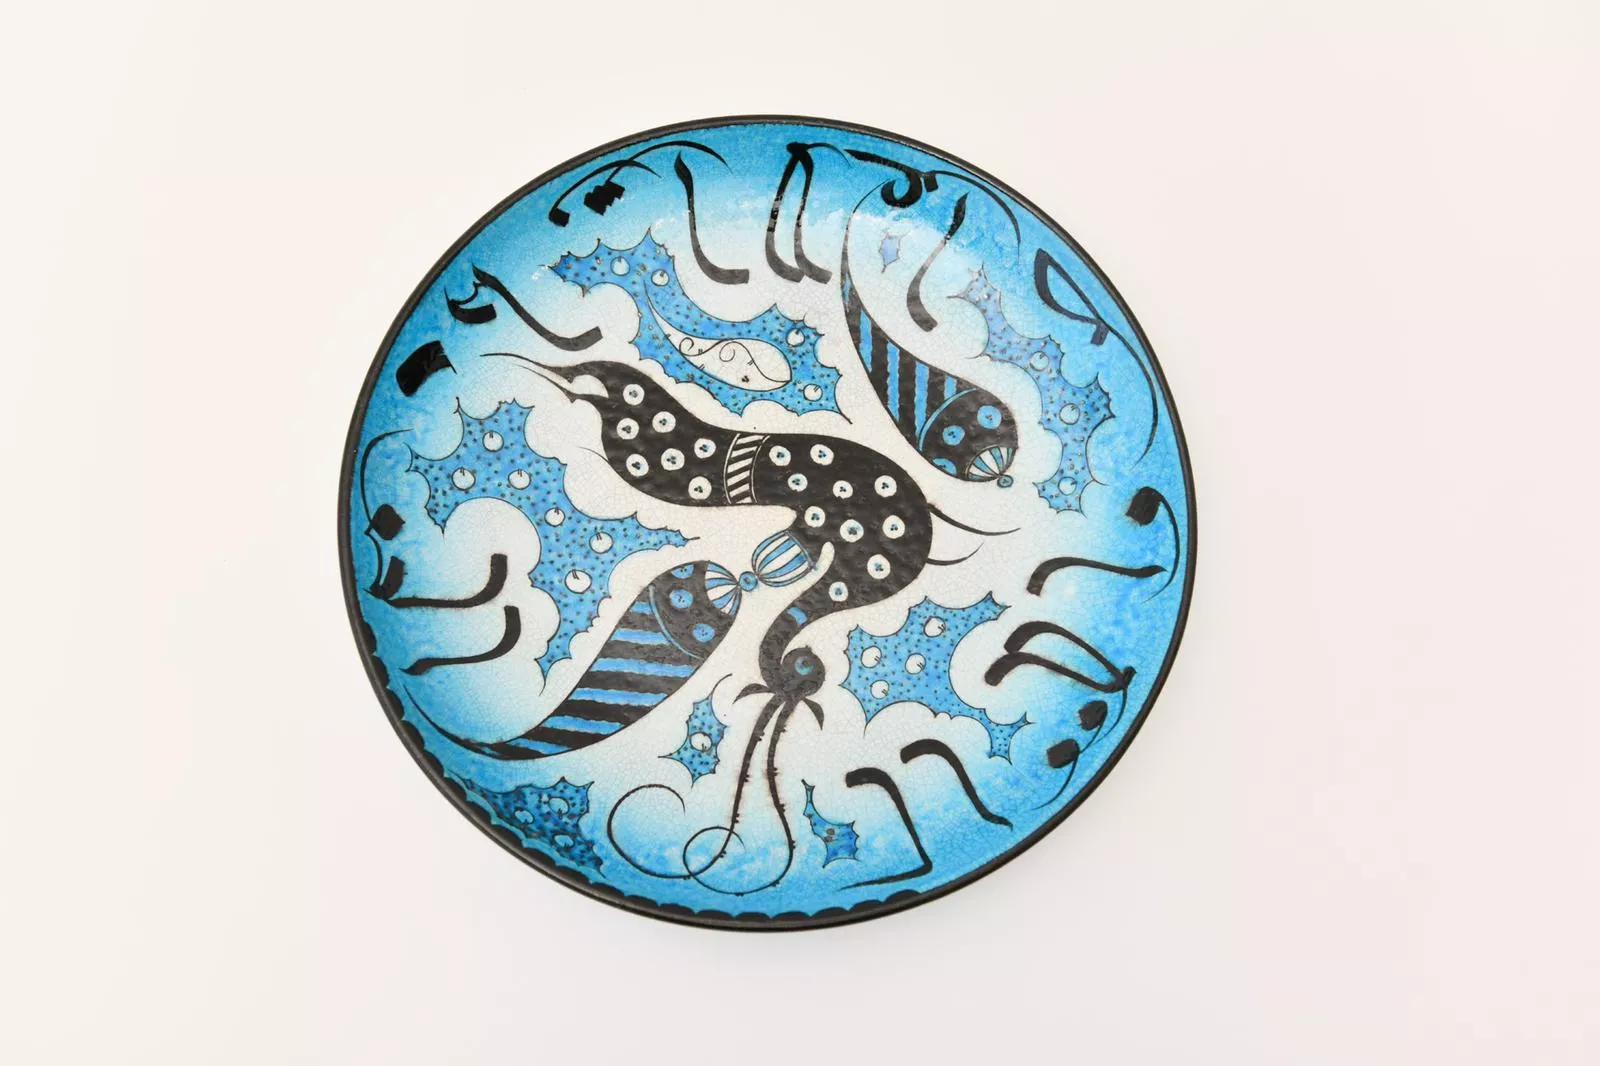 Artisan platter featuring original epigraphic ornament in the ancient Samarkand style